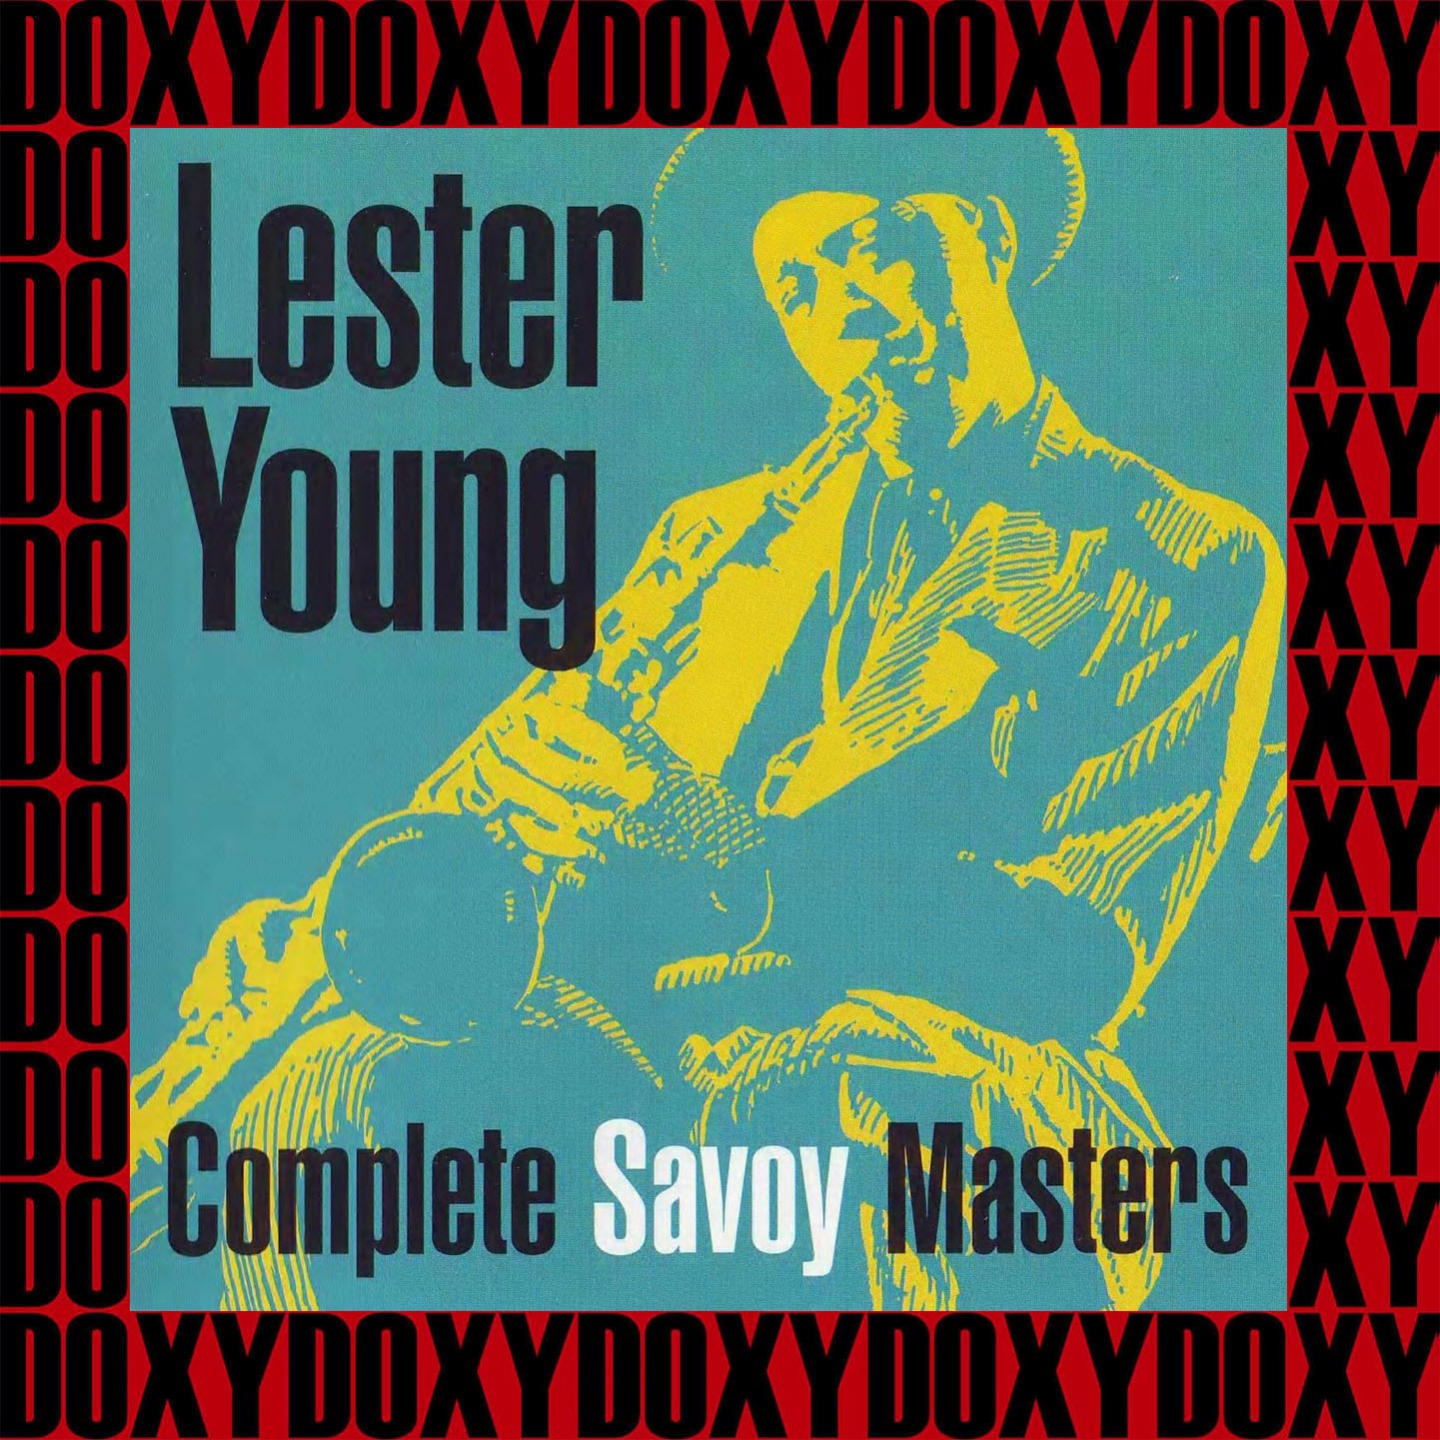 Complete Savoy Masters, 1944-49 (Remastered Version) (Doxy Collection)